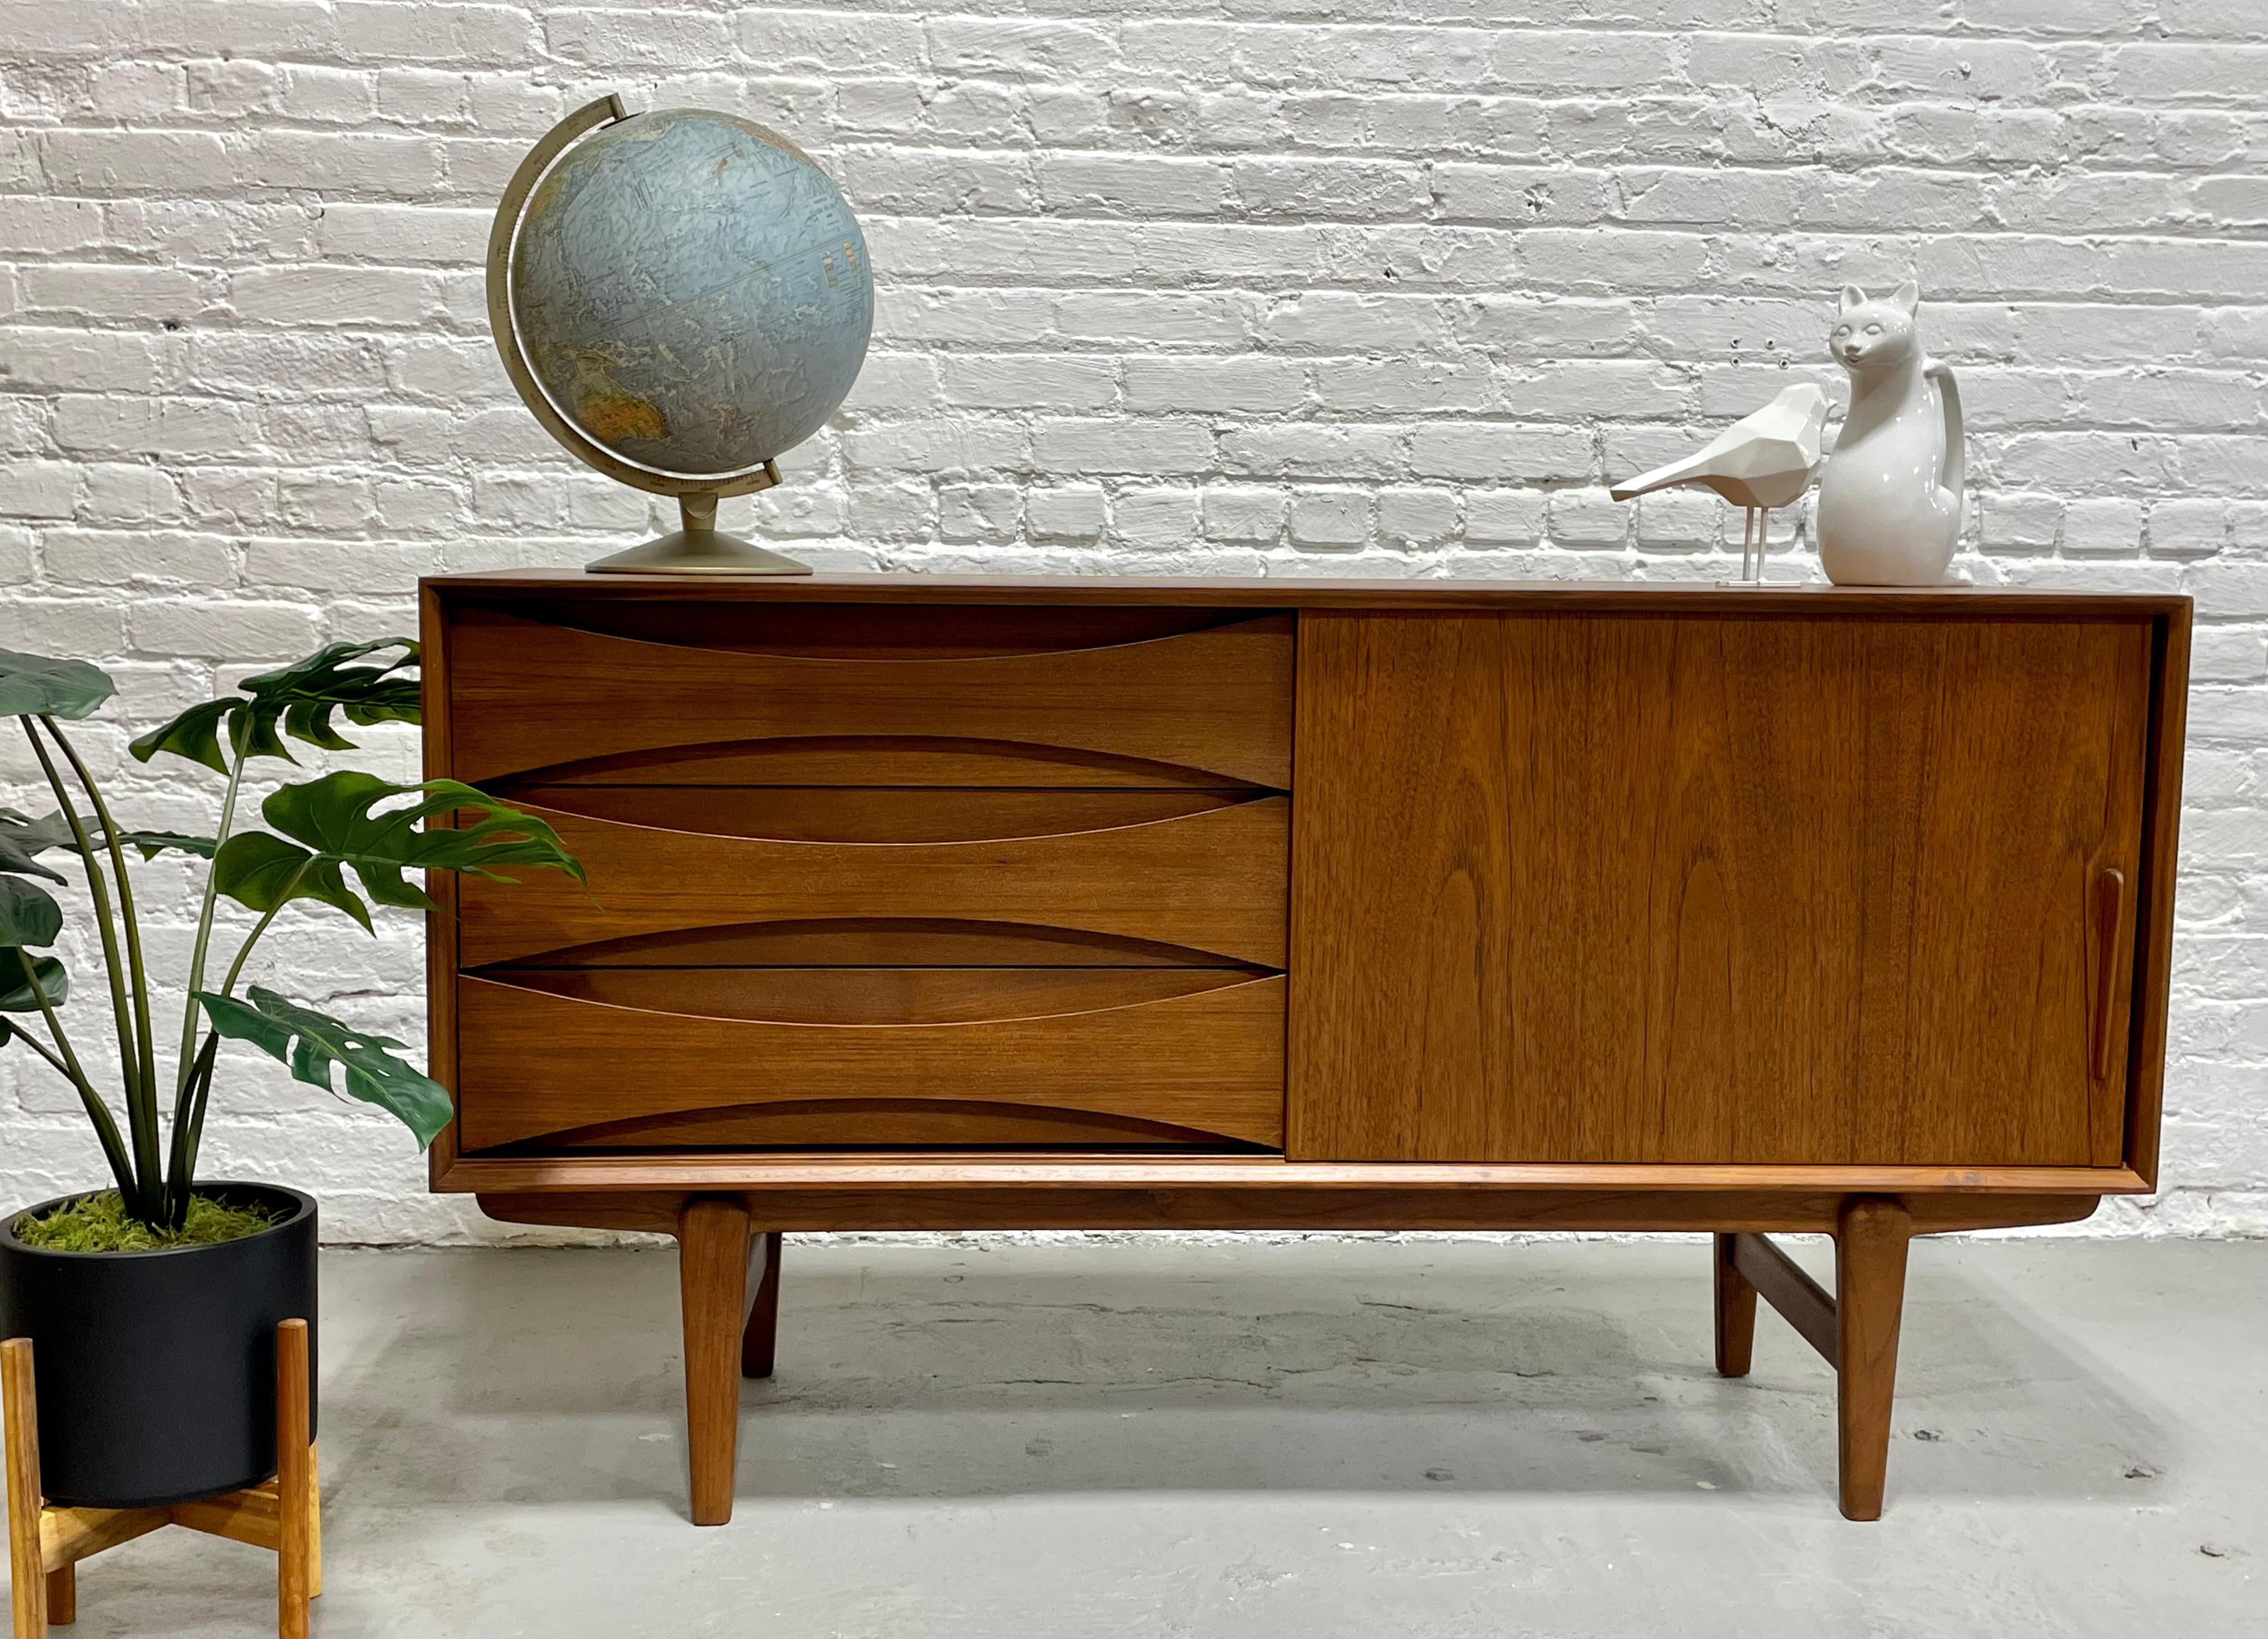 Perfect smaller sized Handmade Mid Century Modern styled credenza / media stand with superb leg design. Thoughtful layout for a media stand - shelving for components along one side and streamlined drawers for remotes and other storage on the other